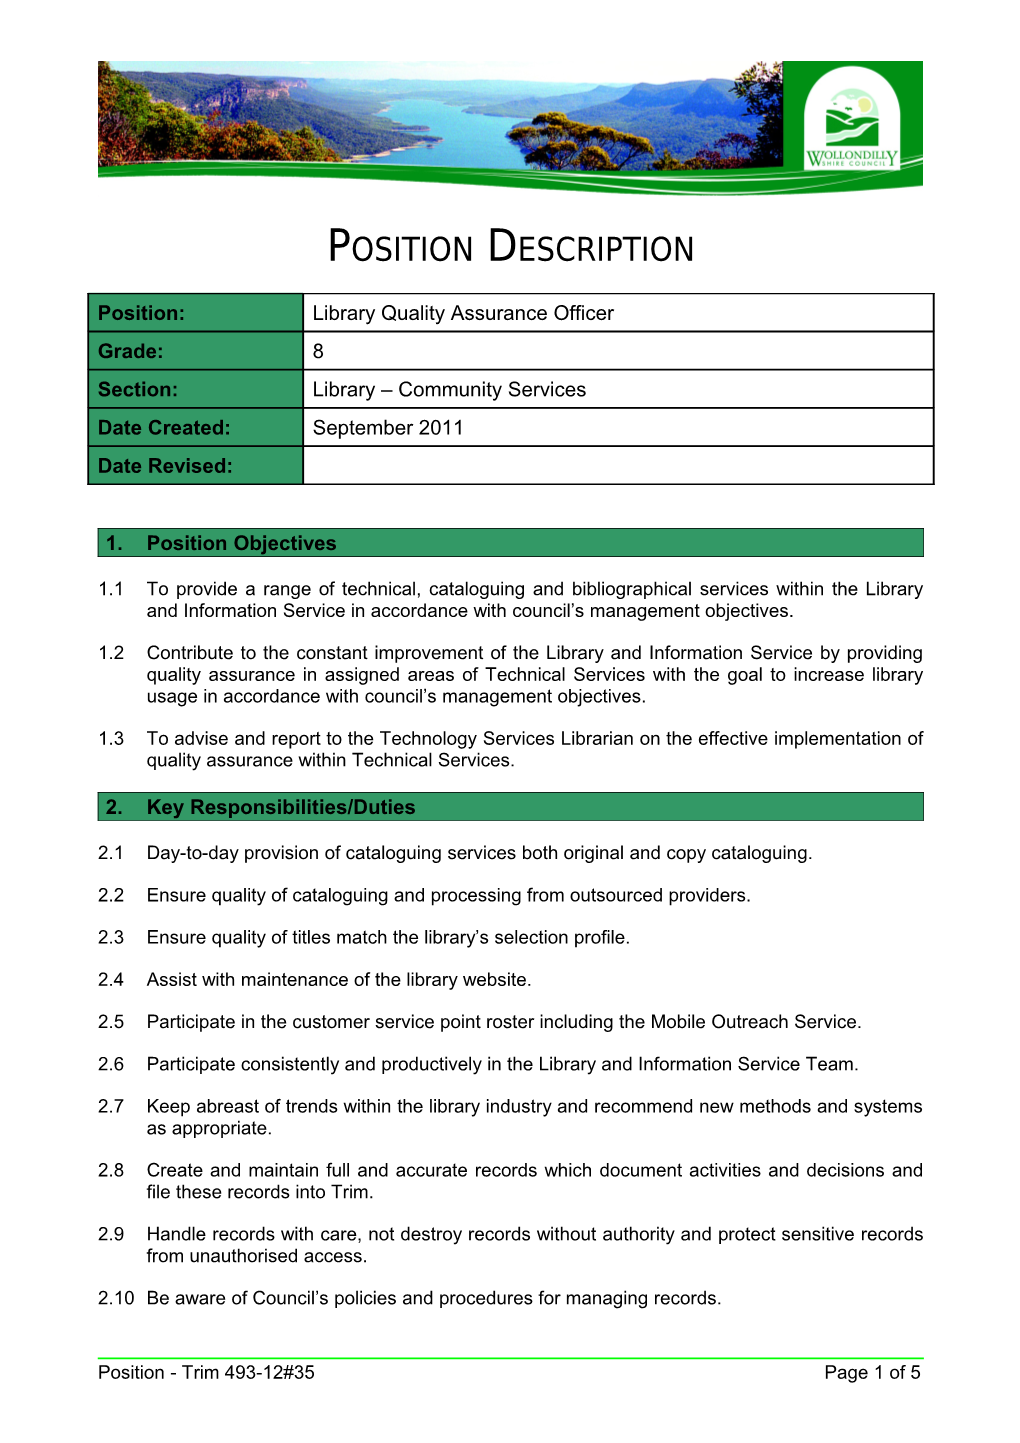 1.Position Objectives